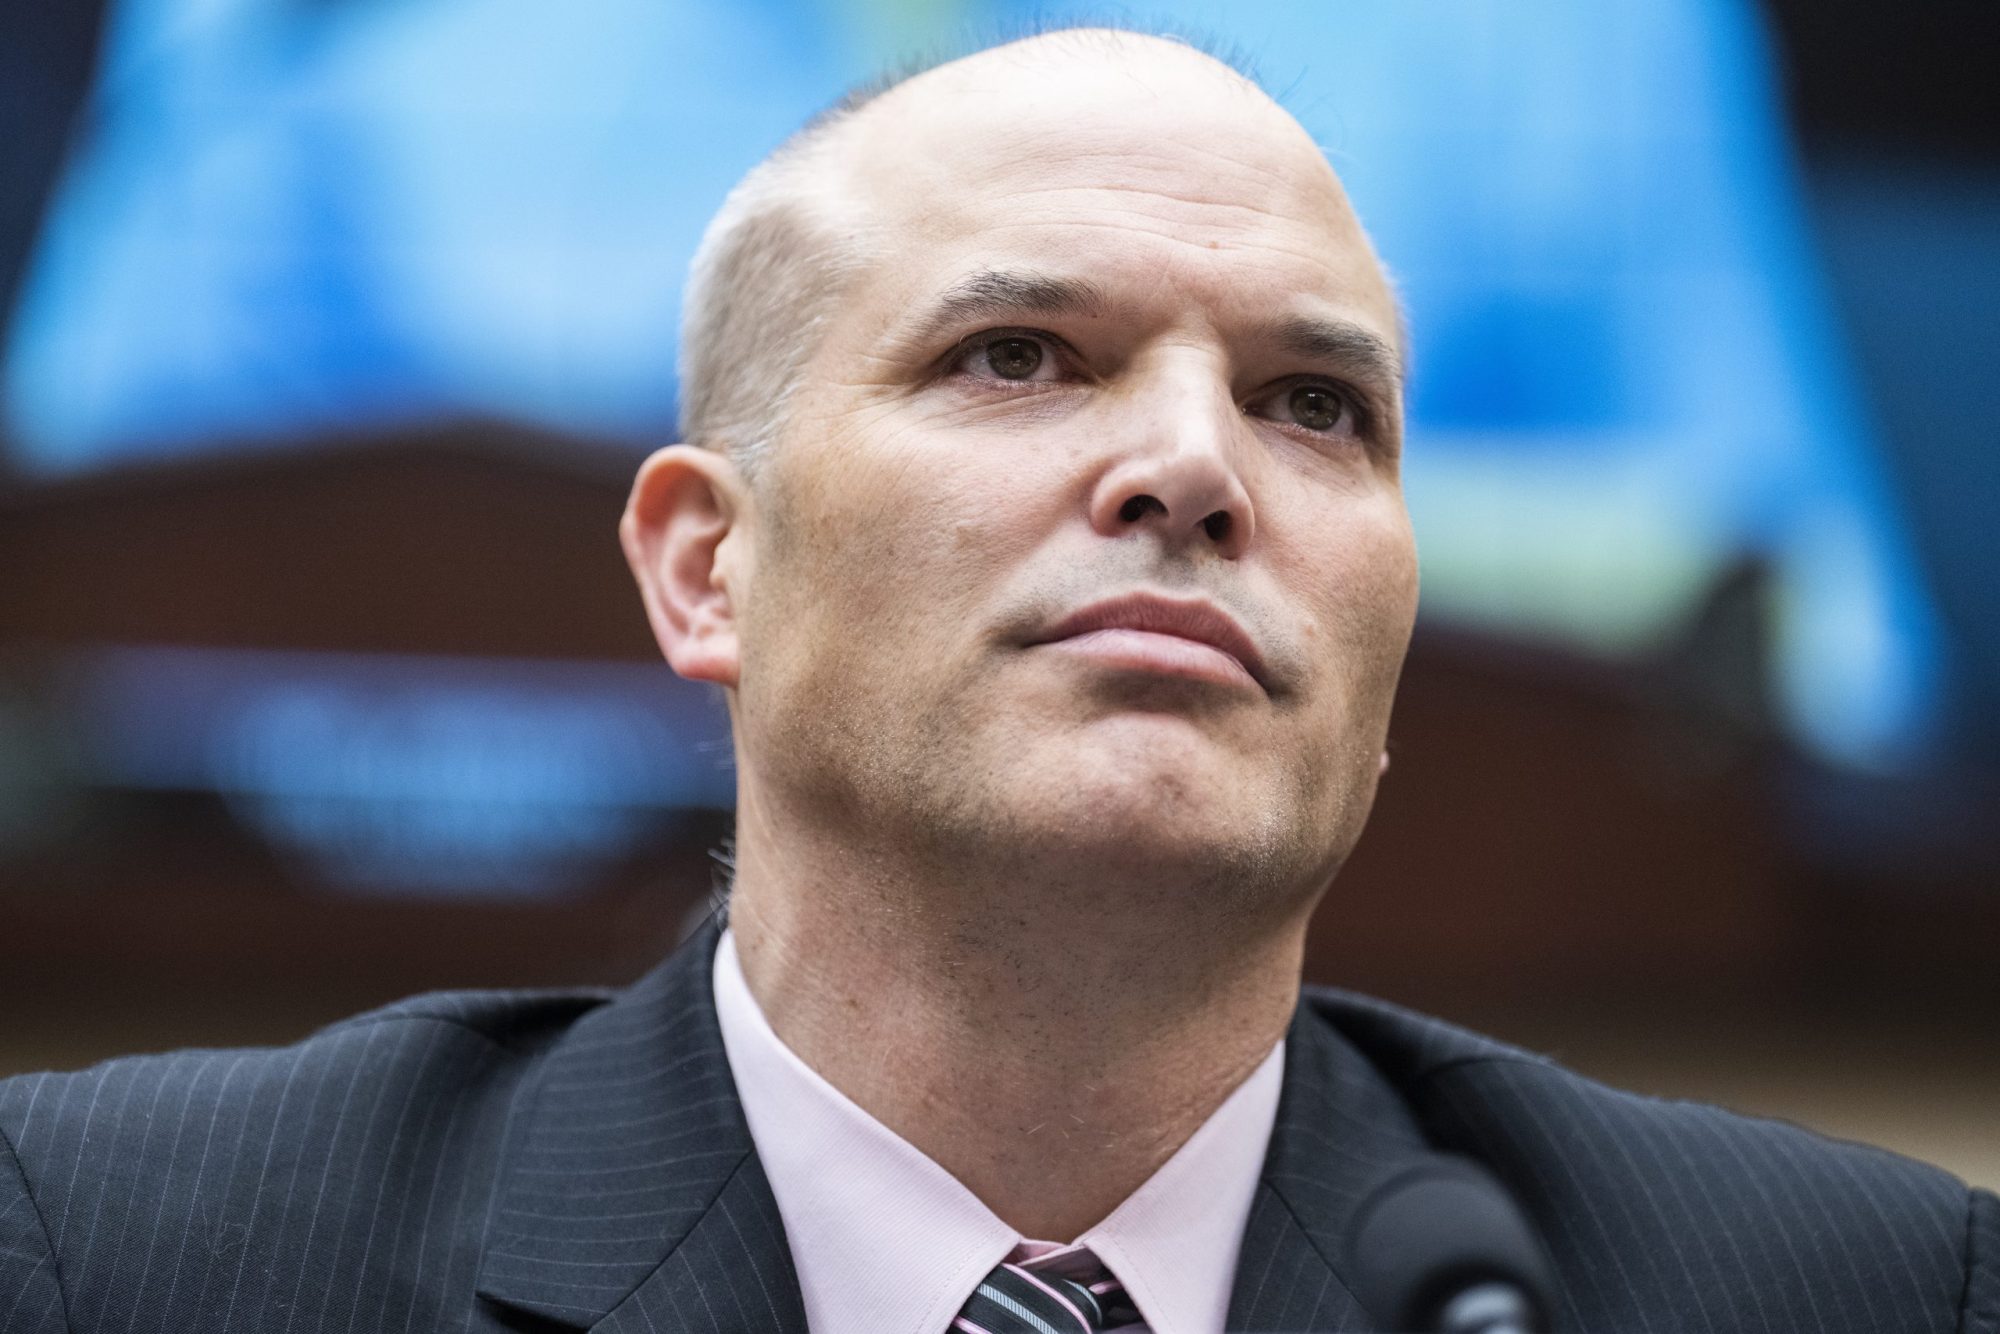 Close up of Matt Taibbi wearing a dark suit during his Twitter Files Congressional testimony.